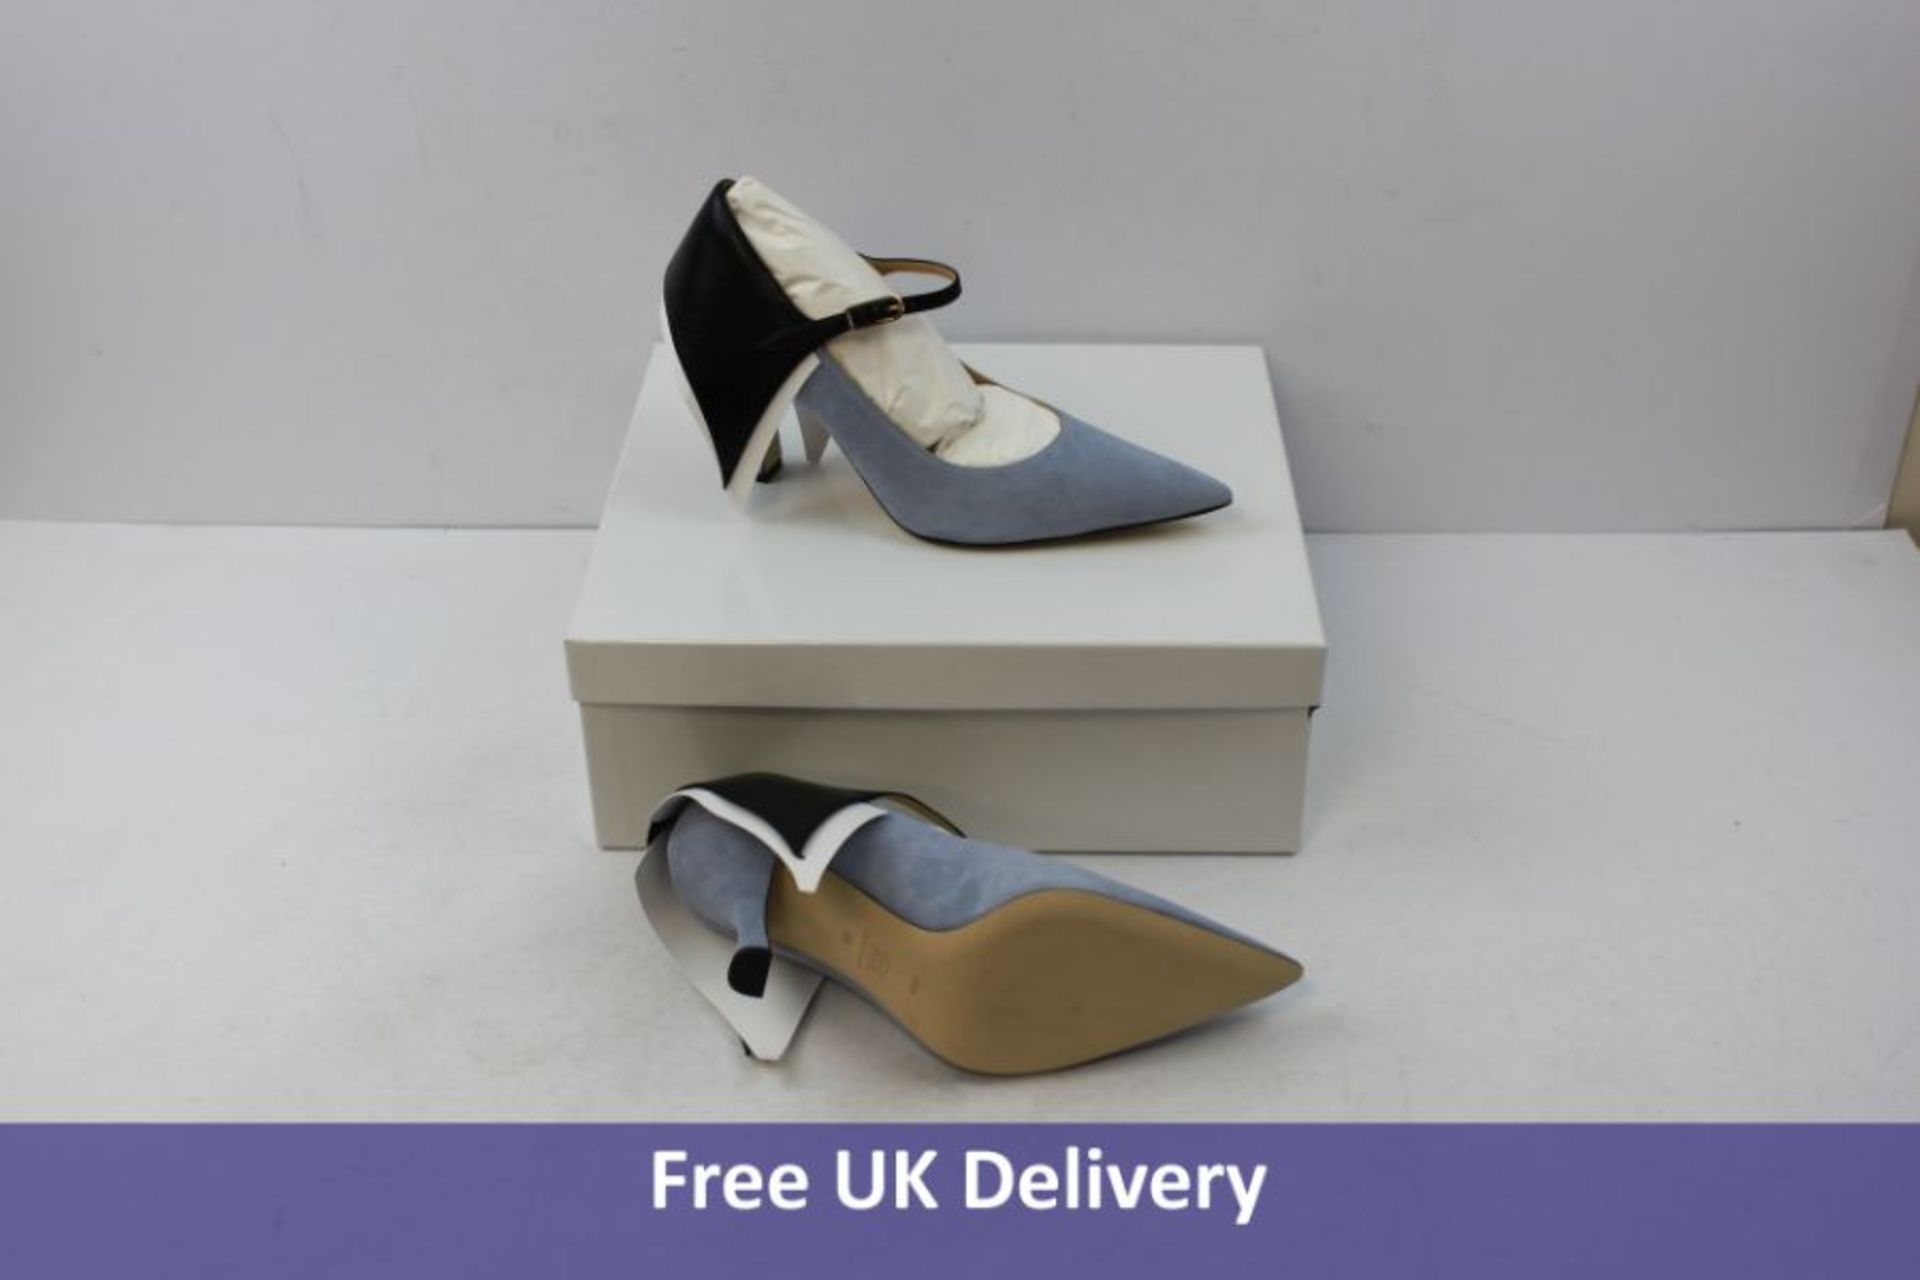 Loewe Mary Jane Pumps, Suede and Leather, Black and Light Blue, UK 6